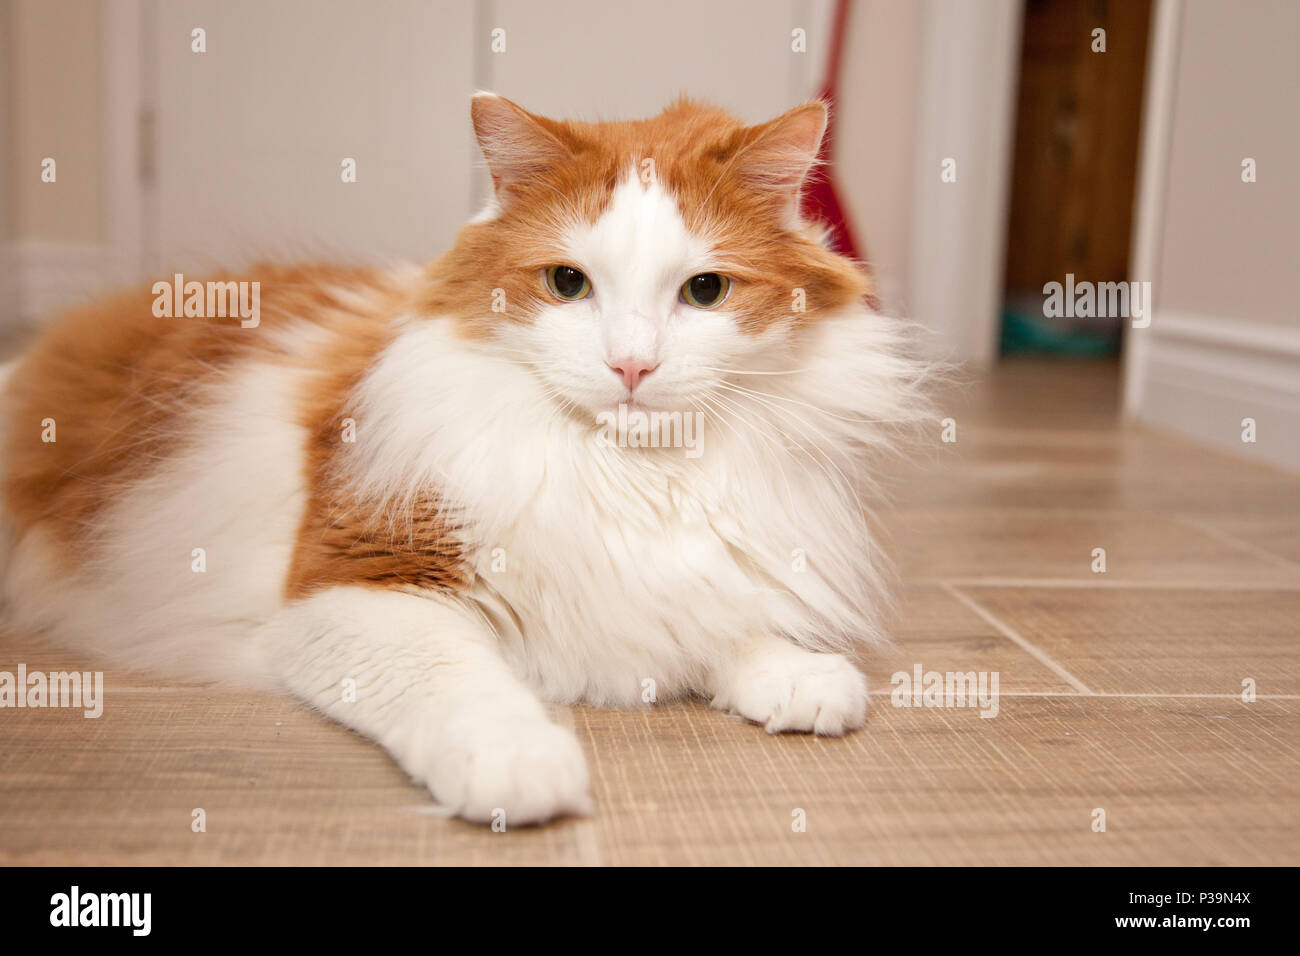 A fluffy orange and white cat laying on the floor at home Stock Photo